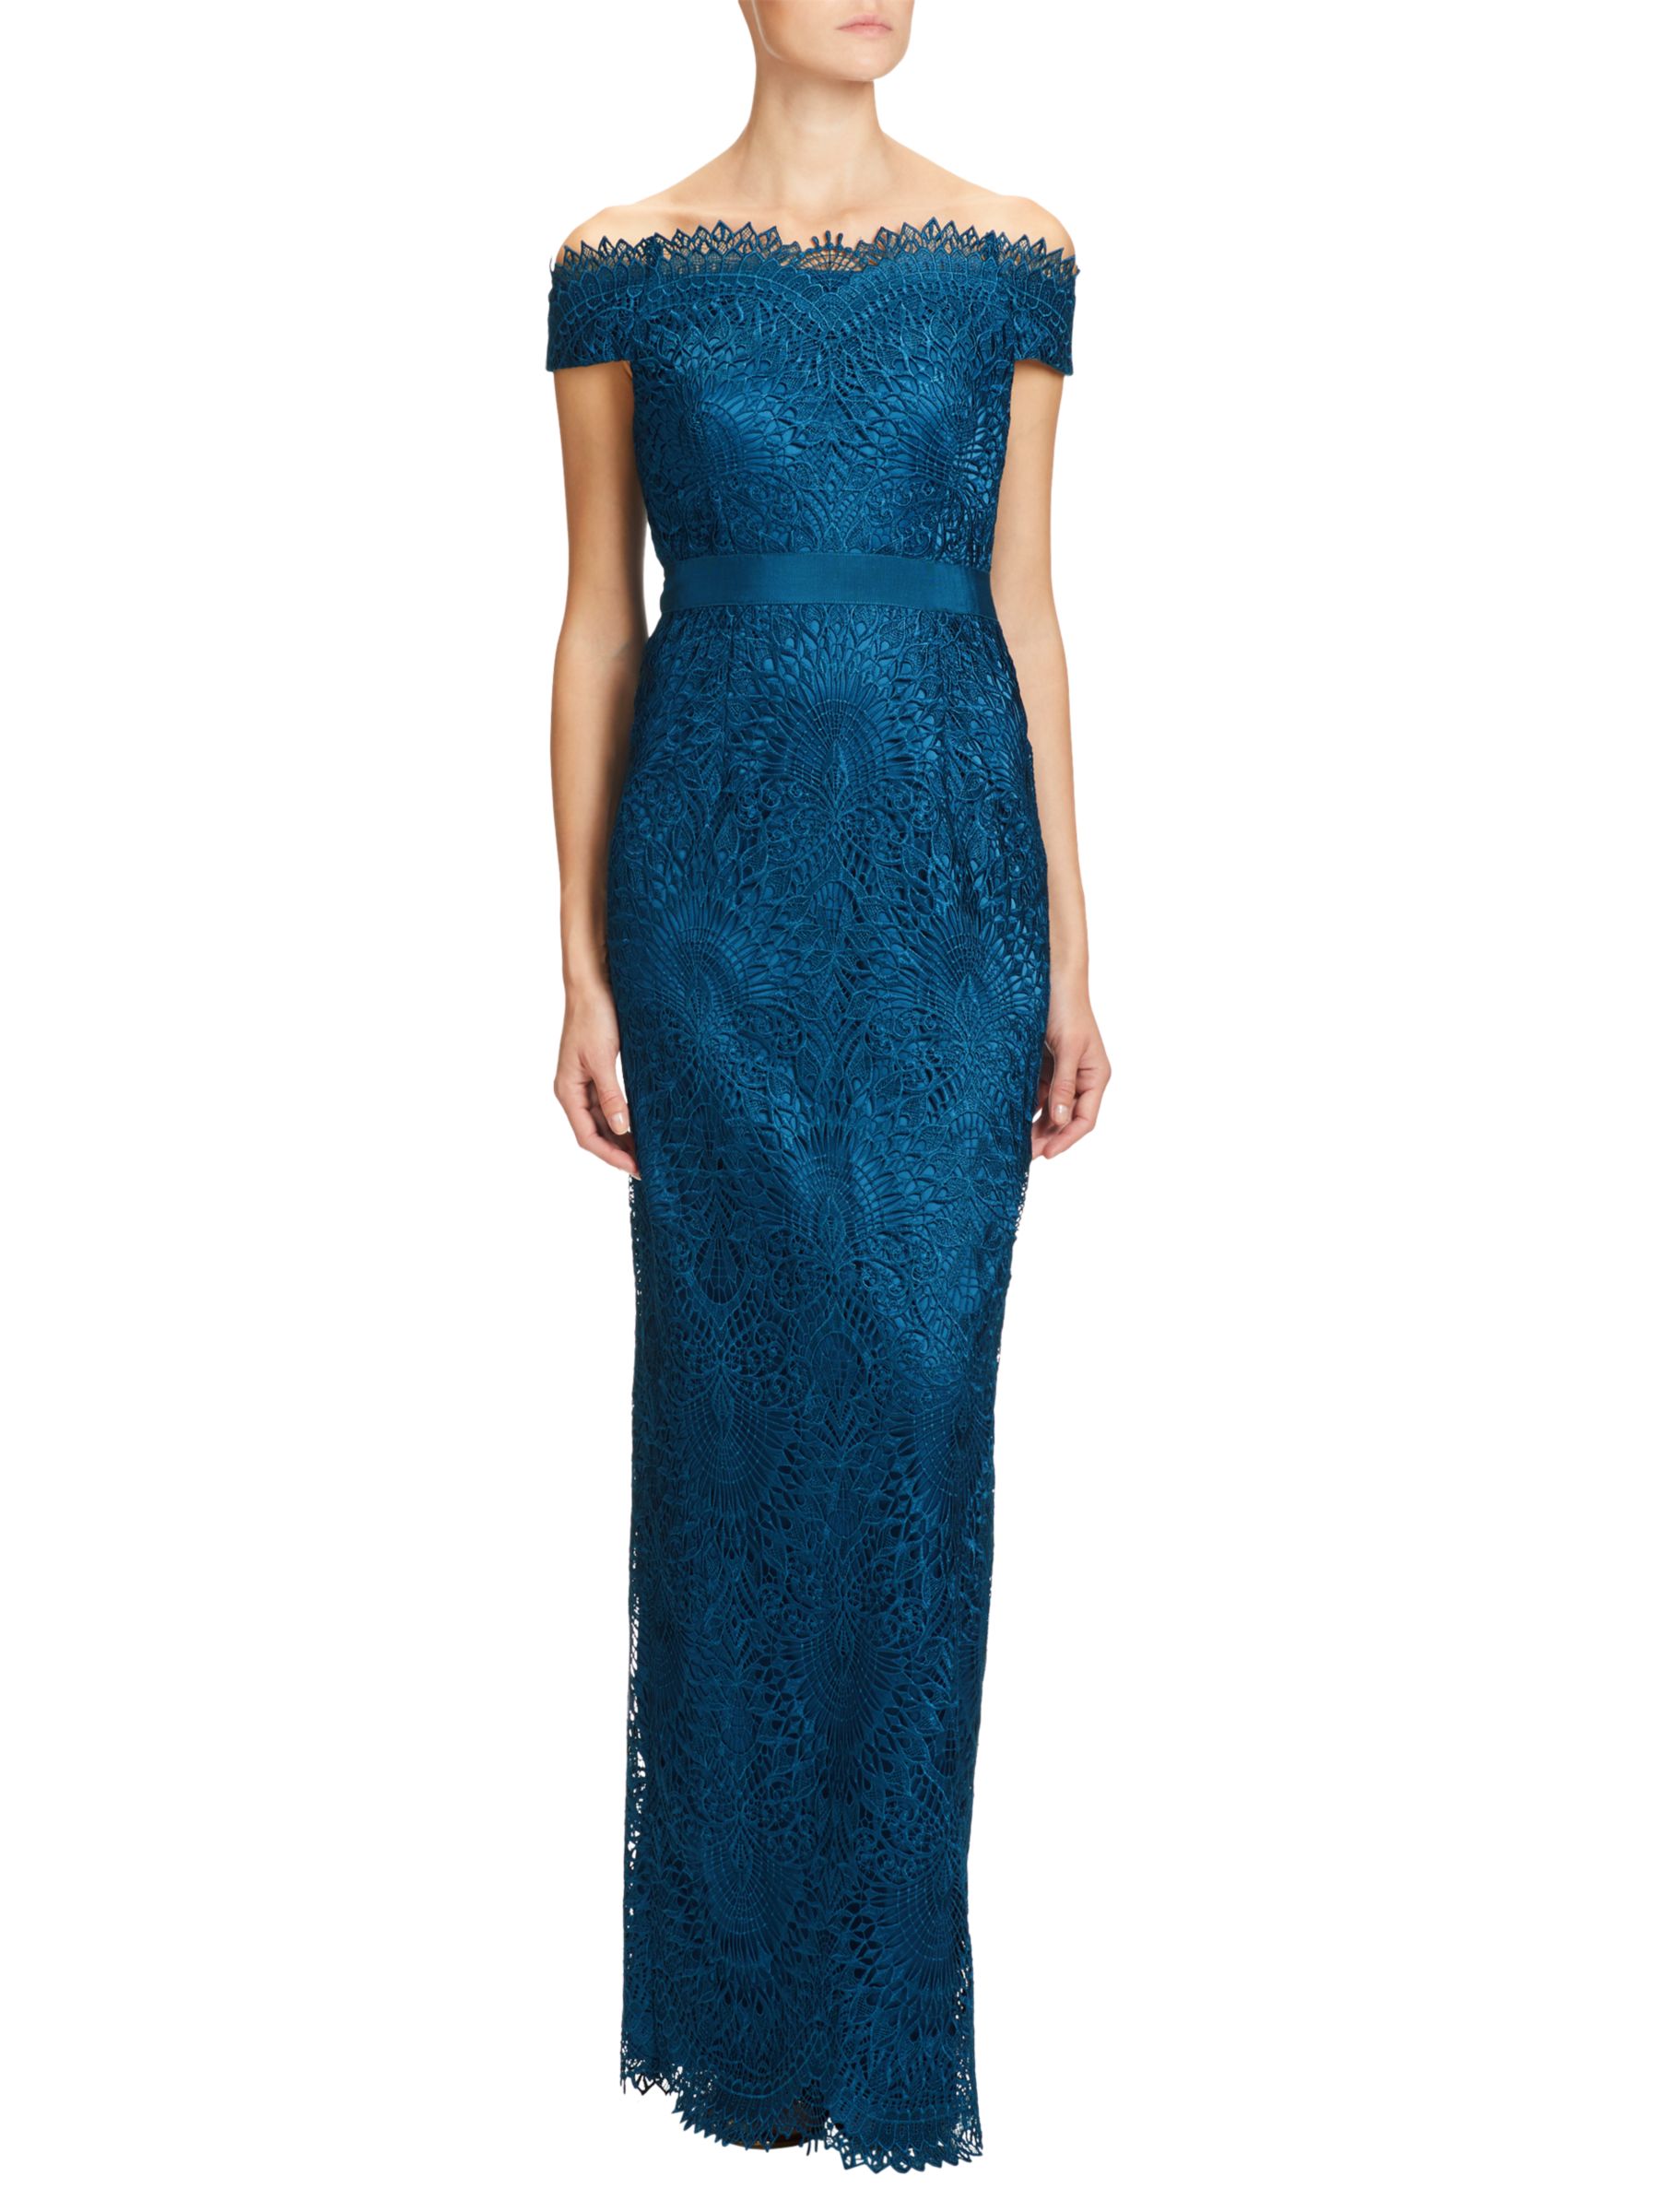 Adrianna Papell Venice Lace Long Dress, Peacock at John Lewis & Partners